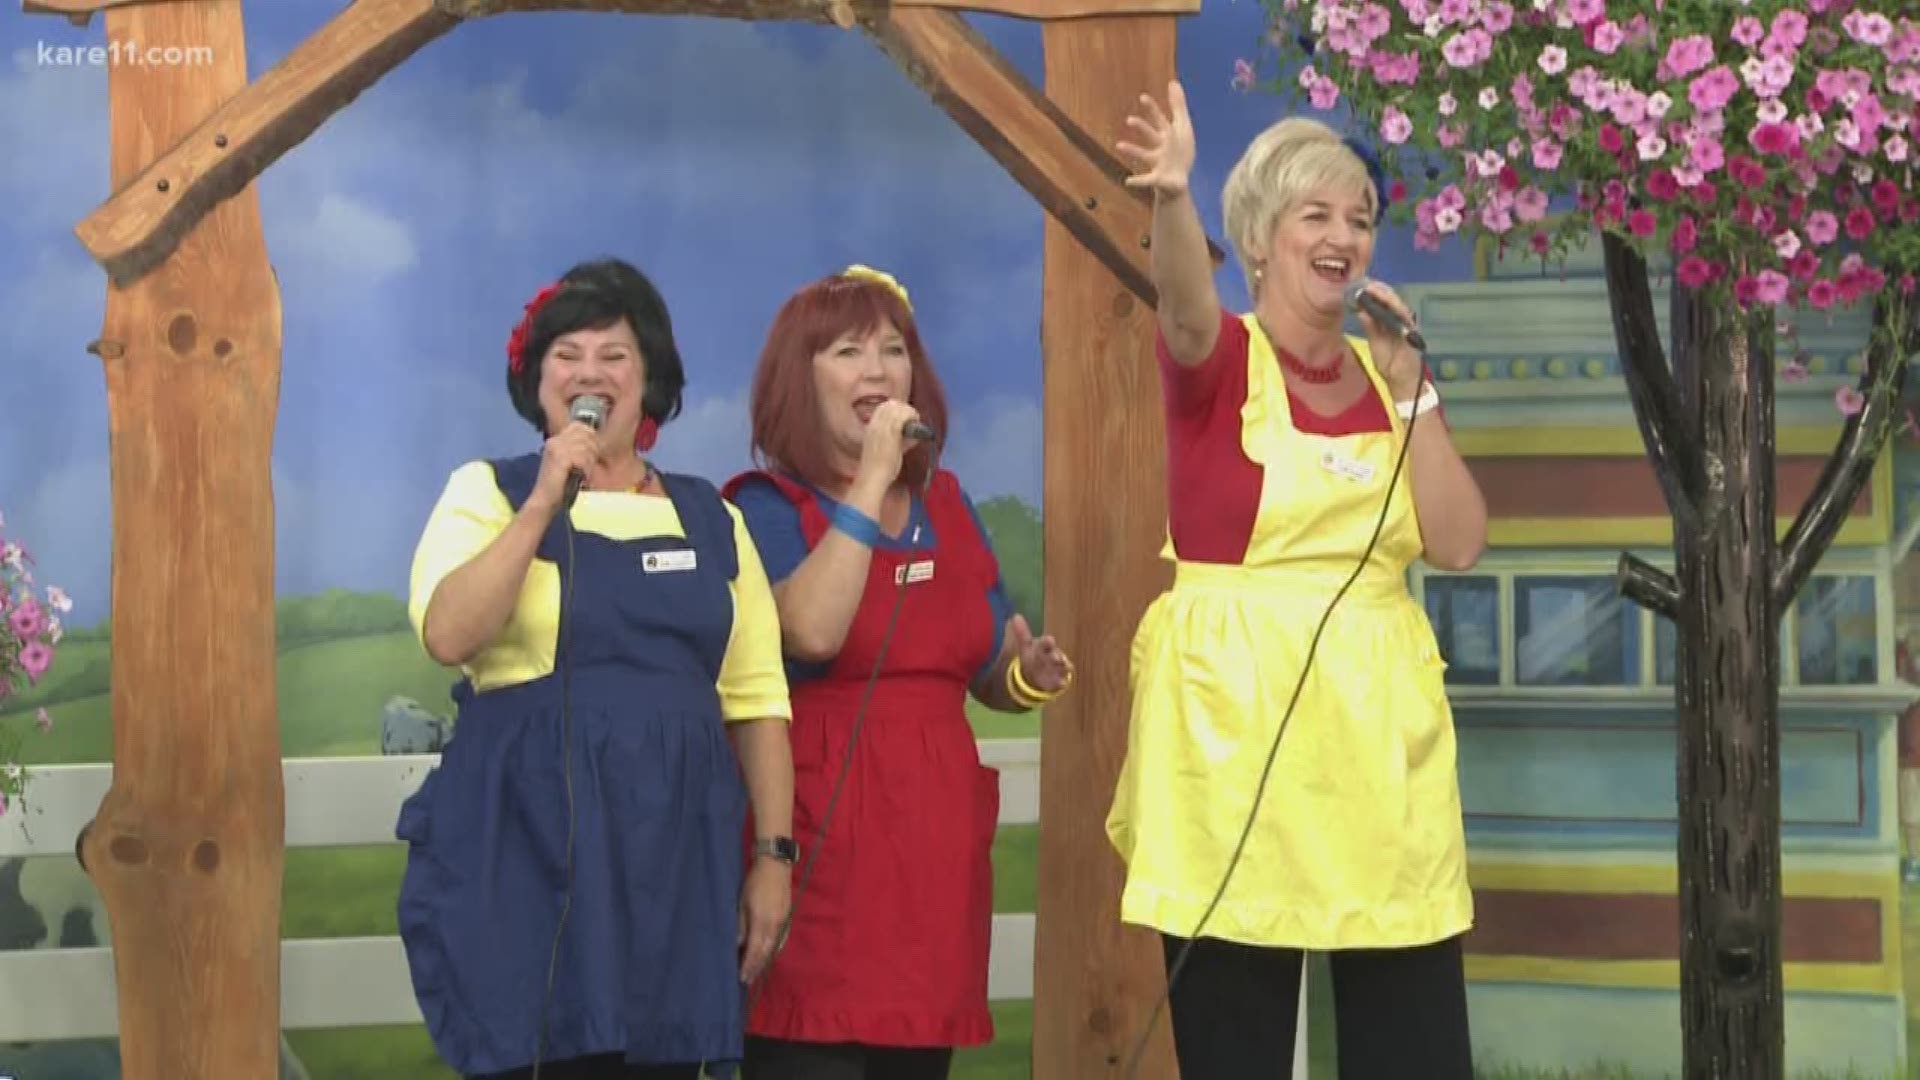 If you love the Church Basement Ladies, you’ll love The Looney Lutherans too!